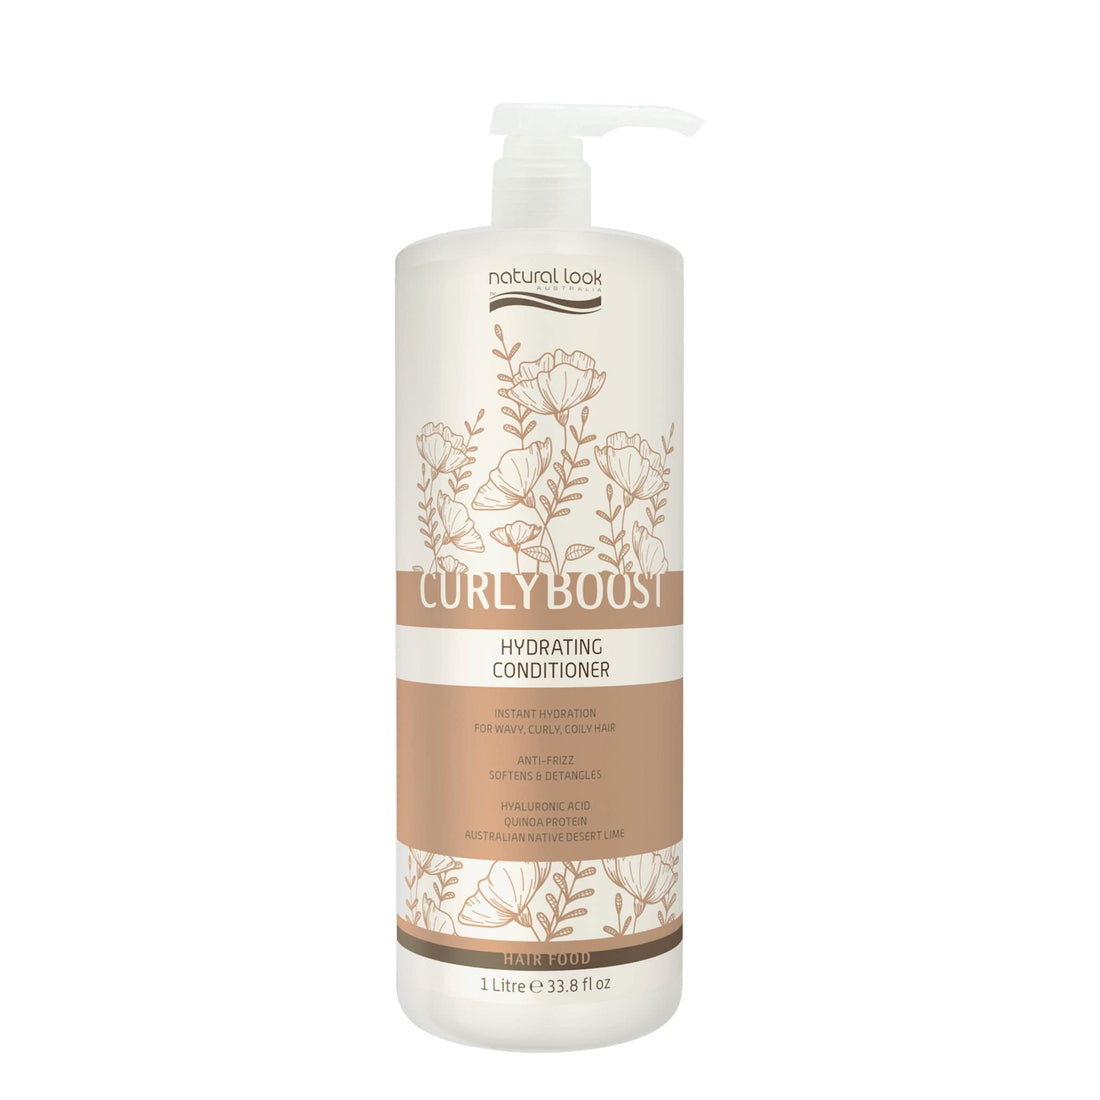 Curly Boost Hydrating Conditioner